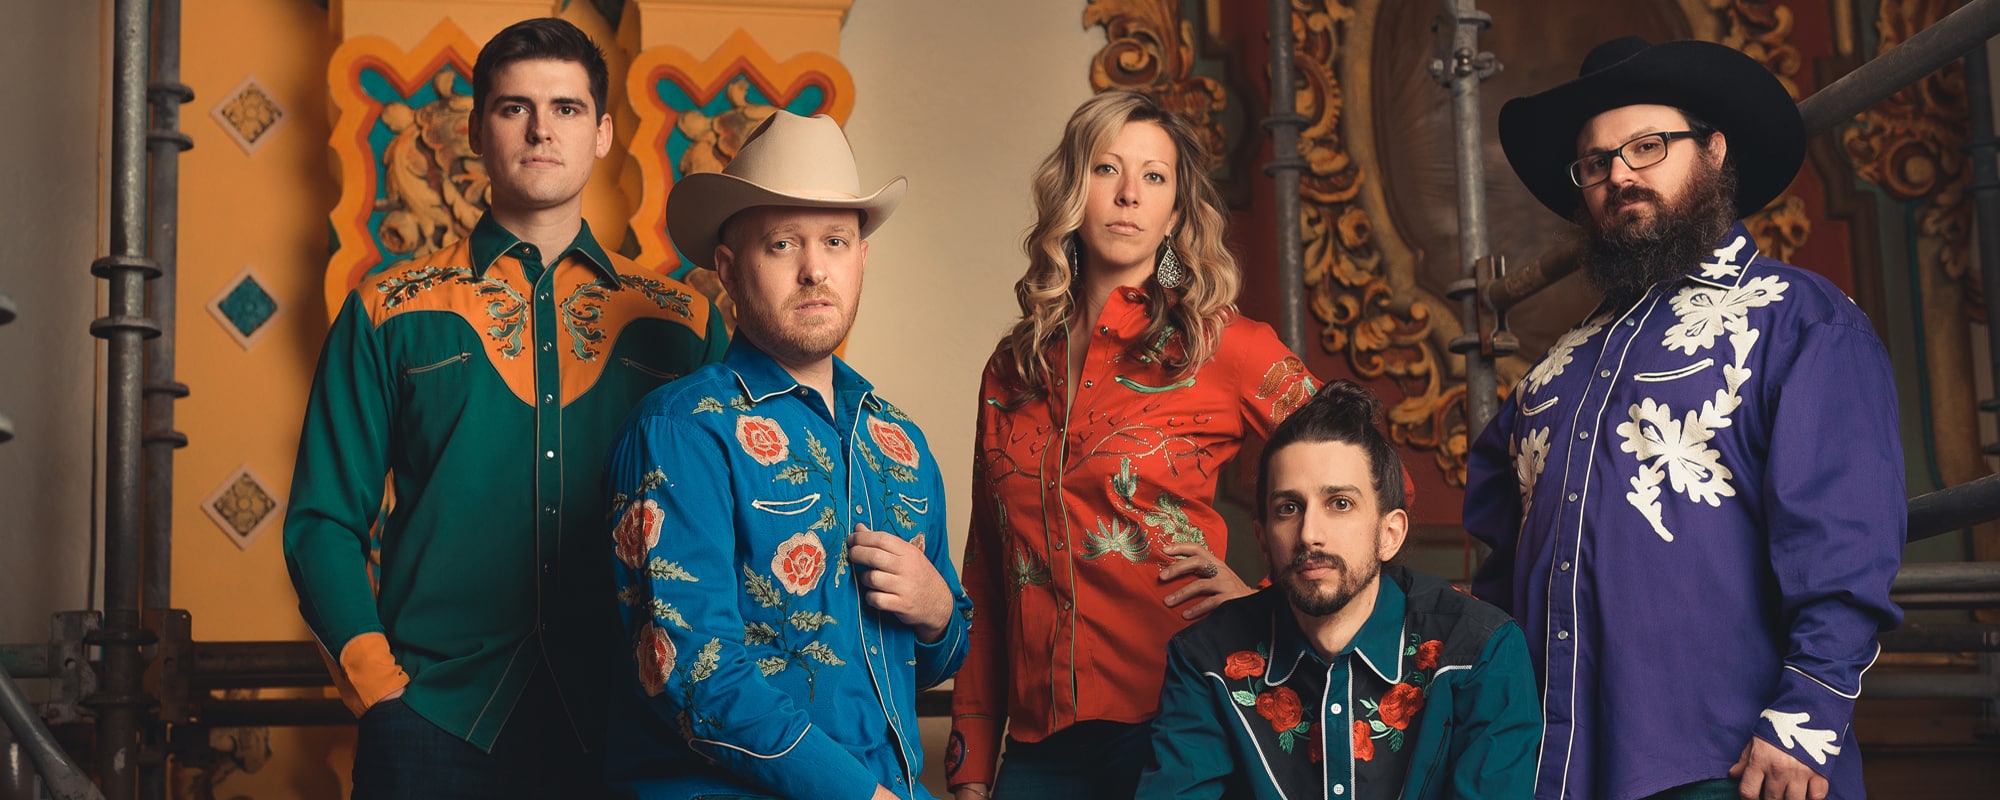 The Shootouts Channel ‘90s Country and California Rock for New Single, “Everything I Know”